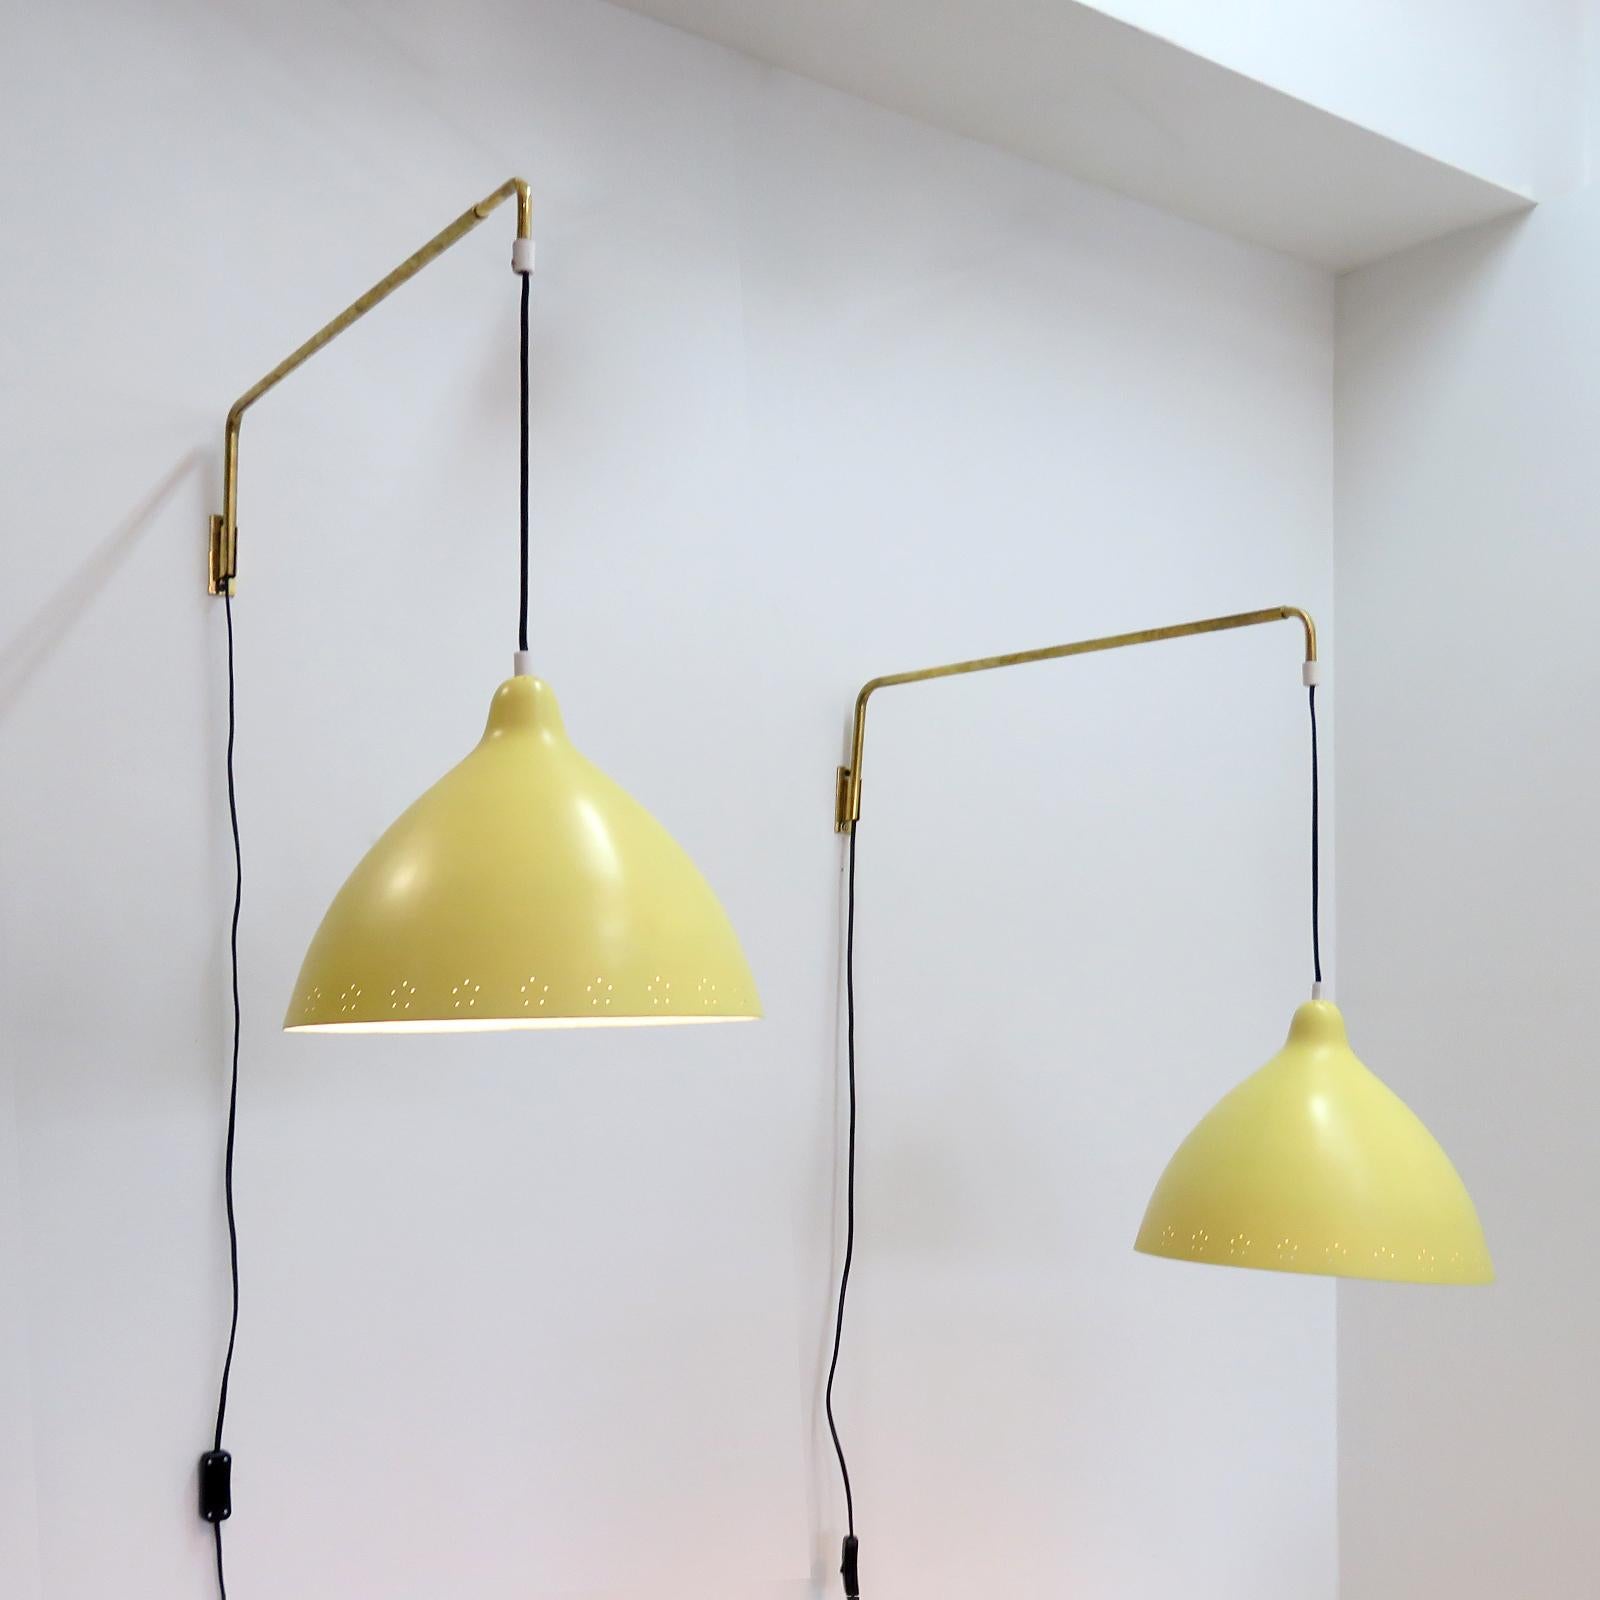 Swing Arm Wall Lights by Lisa Johansson-Pape for Orno, 1960 For Sale 2